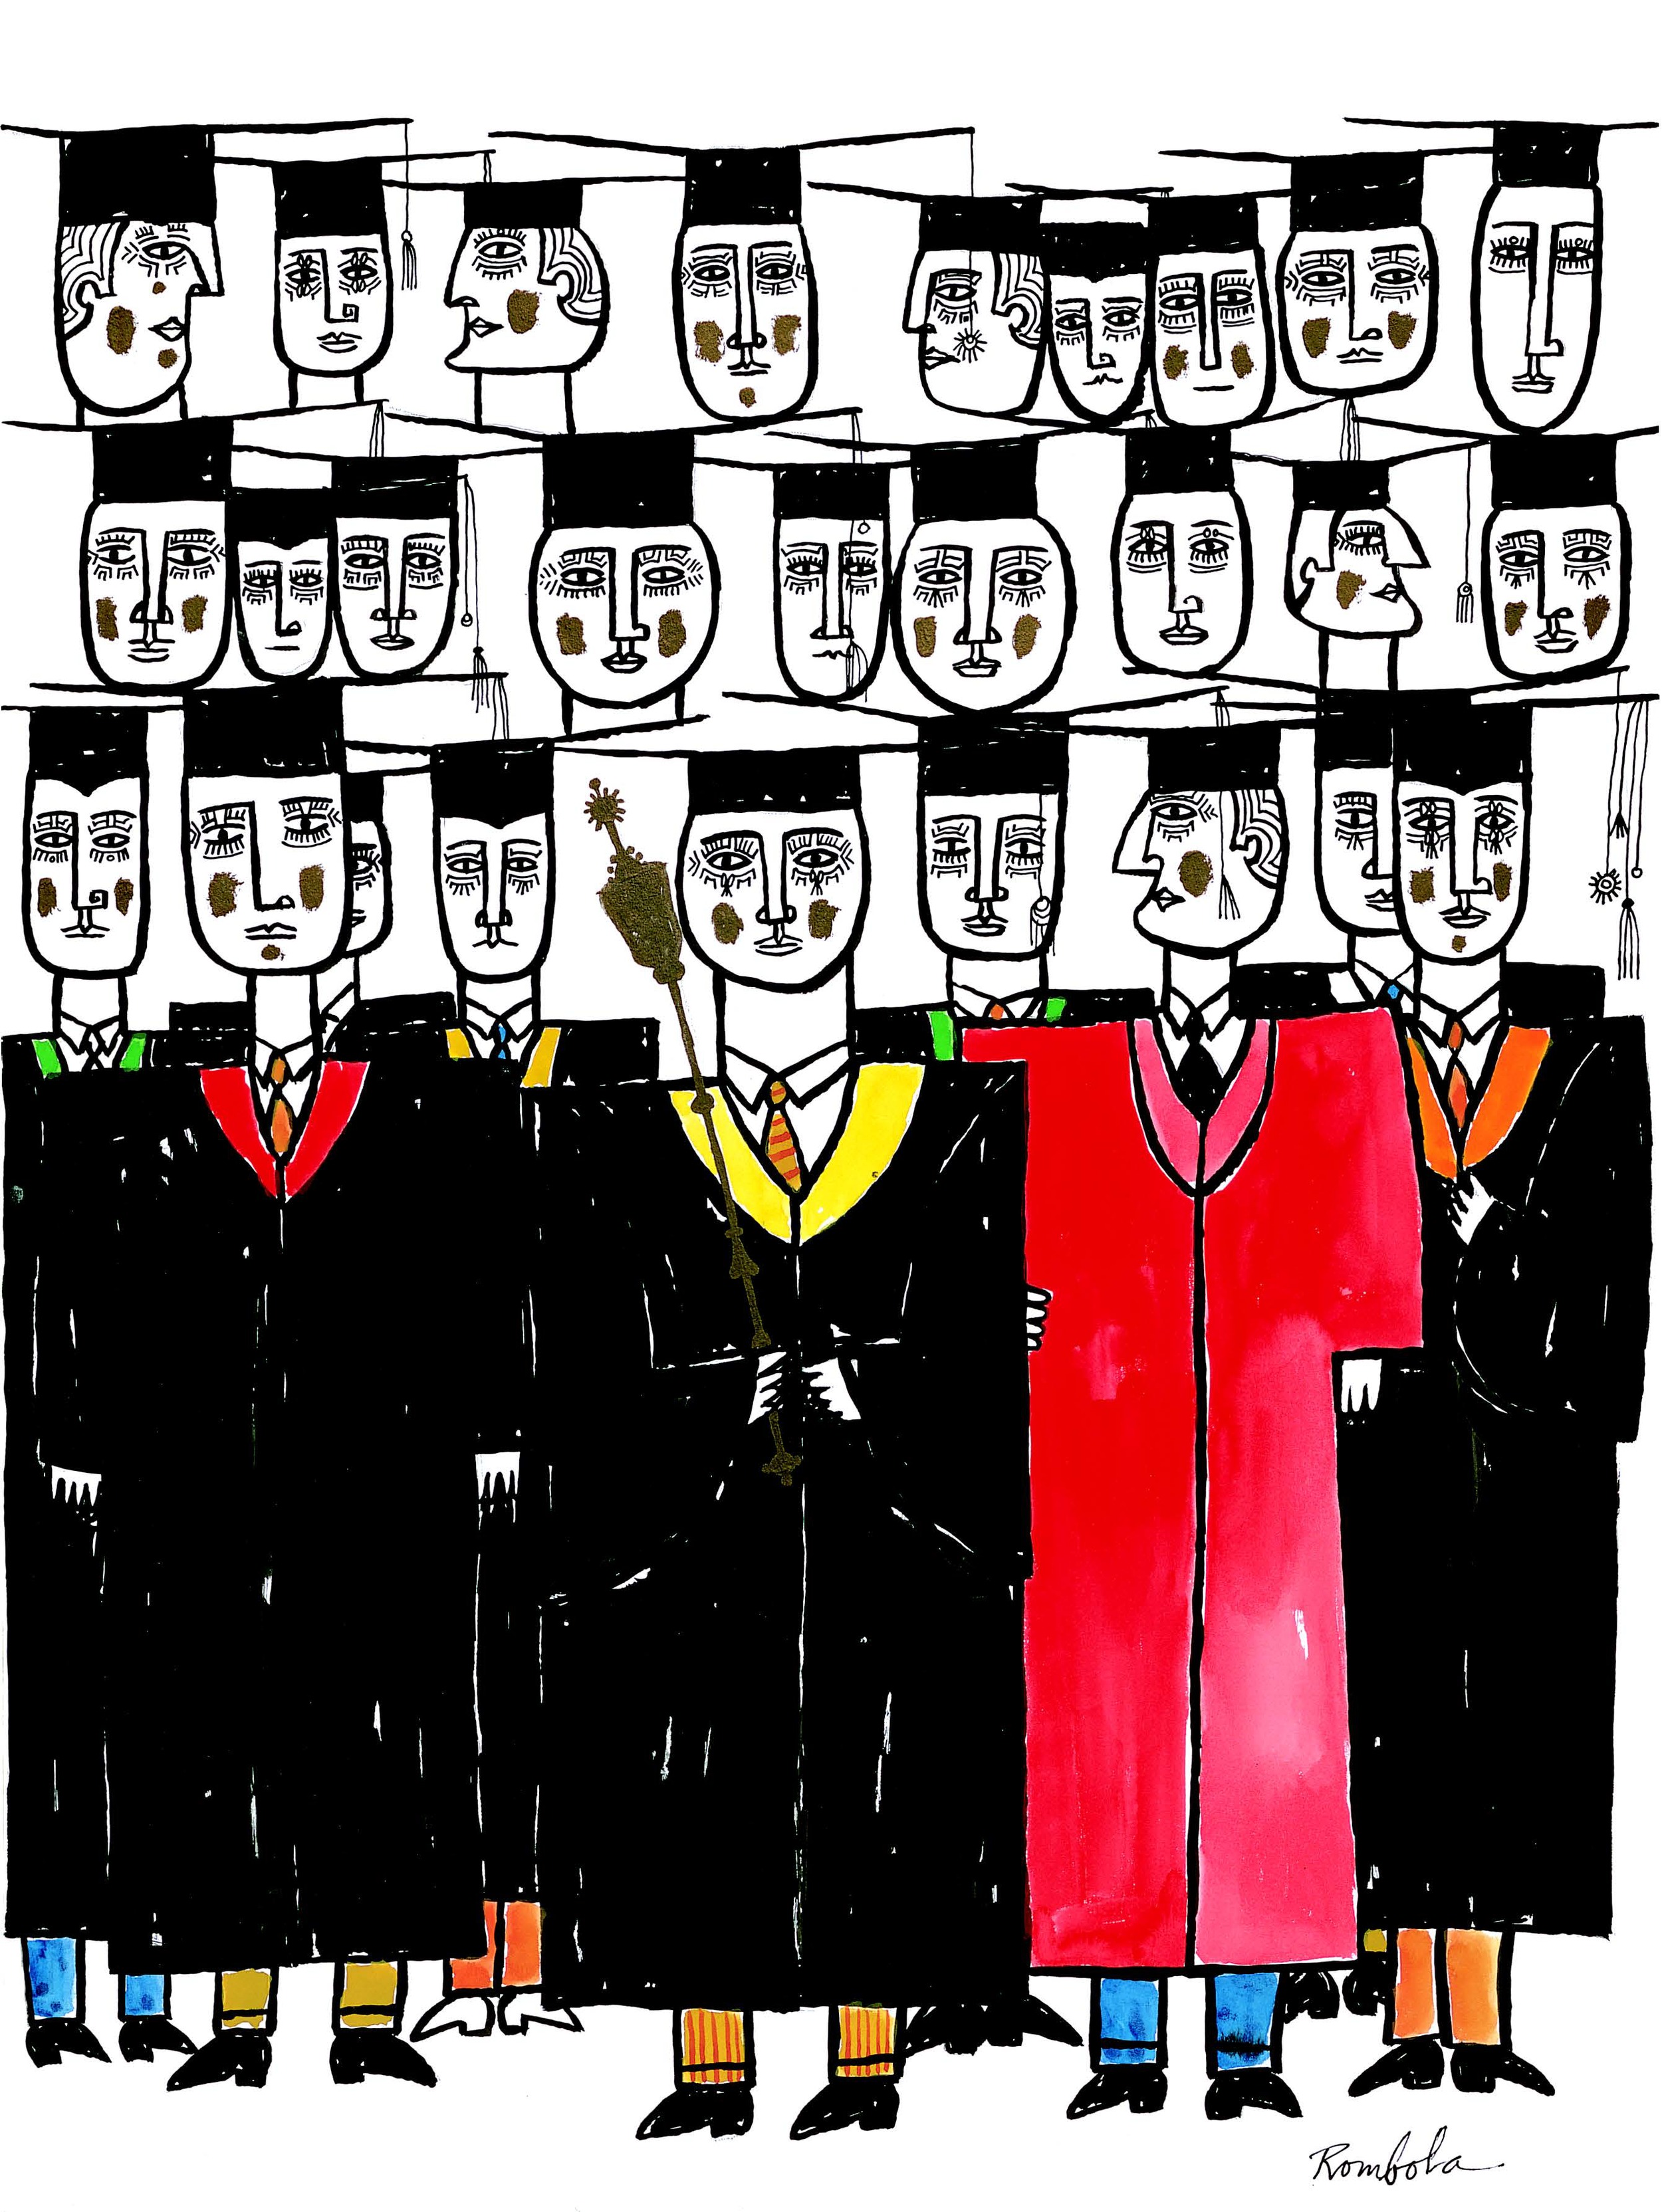   The Graduates    Gouache and ink on paper 1957   